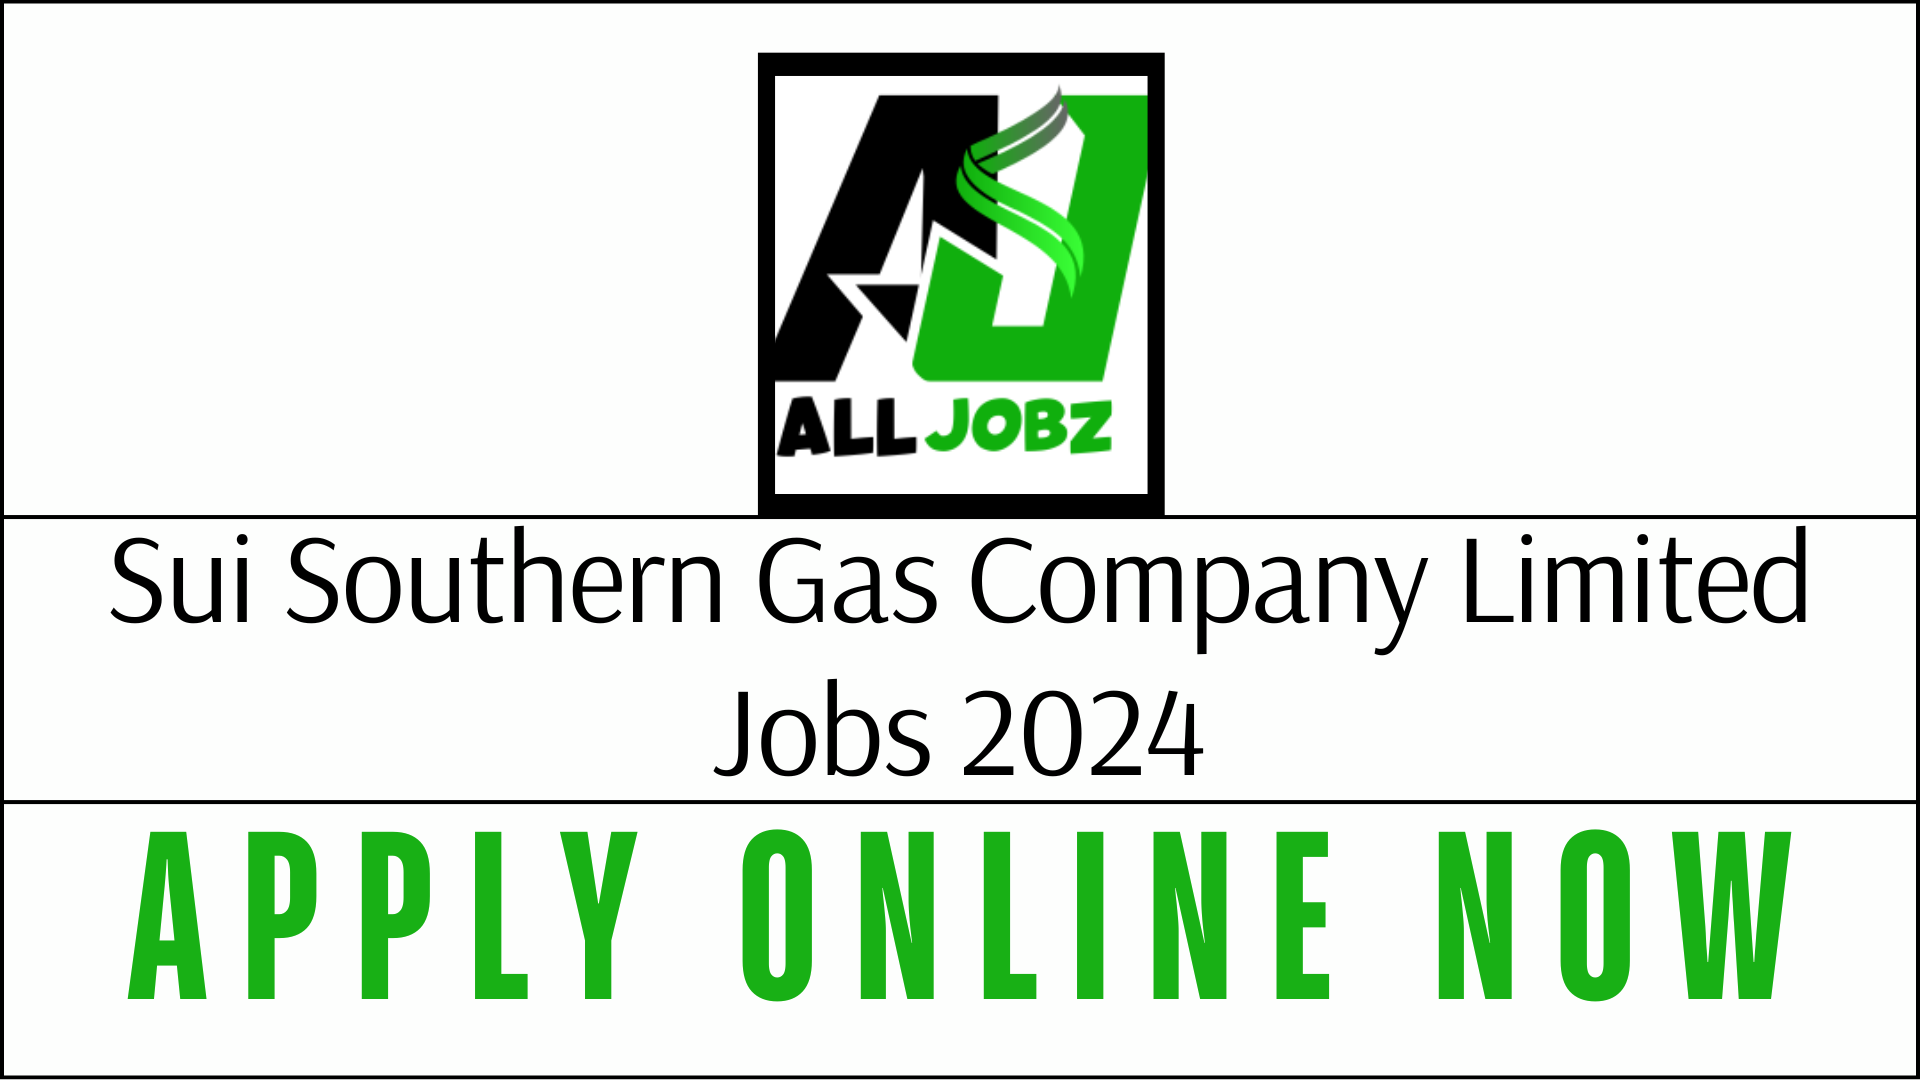 Sui Southern Gas Company Limited Jobs 2024 In Karachi, Sui Southern Gas Company Limited Jobs 2024 In Karachi Salary, Sui Southern Gas Company Jobs 2024, Sui Southern Gas Company Limited Jobs 2024 In Karachi Online, Sui Southern Gas Company Limited Jobs 2024 In Karachi Last, Sui Gas Jobs 2024 Online Apply, Sui Gas Jobs Apply Online, Sui Gas Jobs 2024 Online Apply Last Date, Ssgc Driver Jobs 2024,